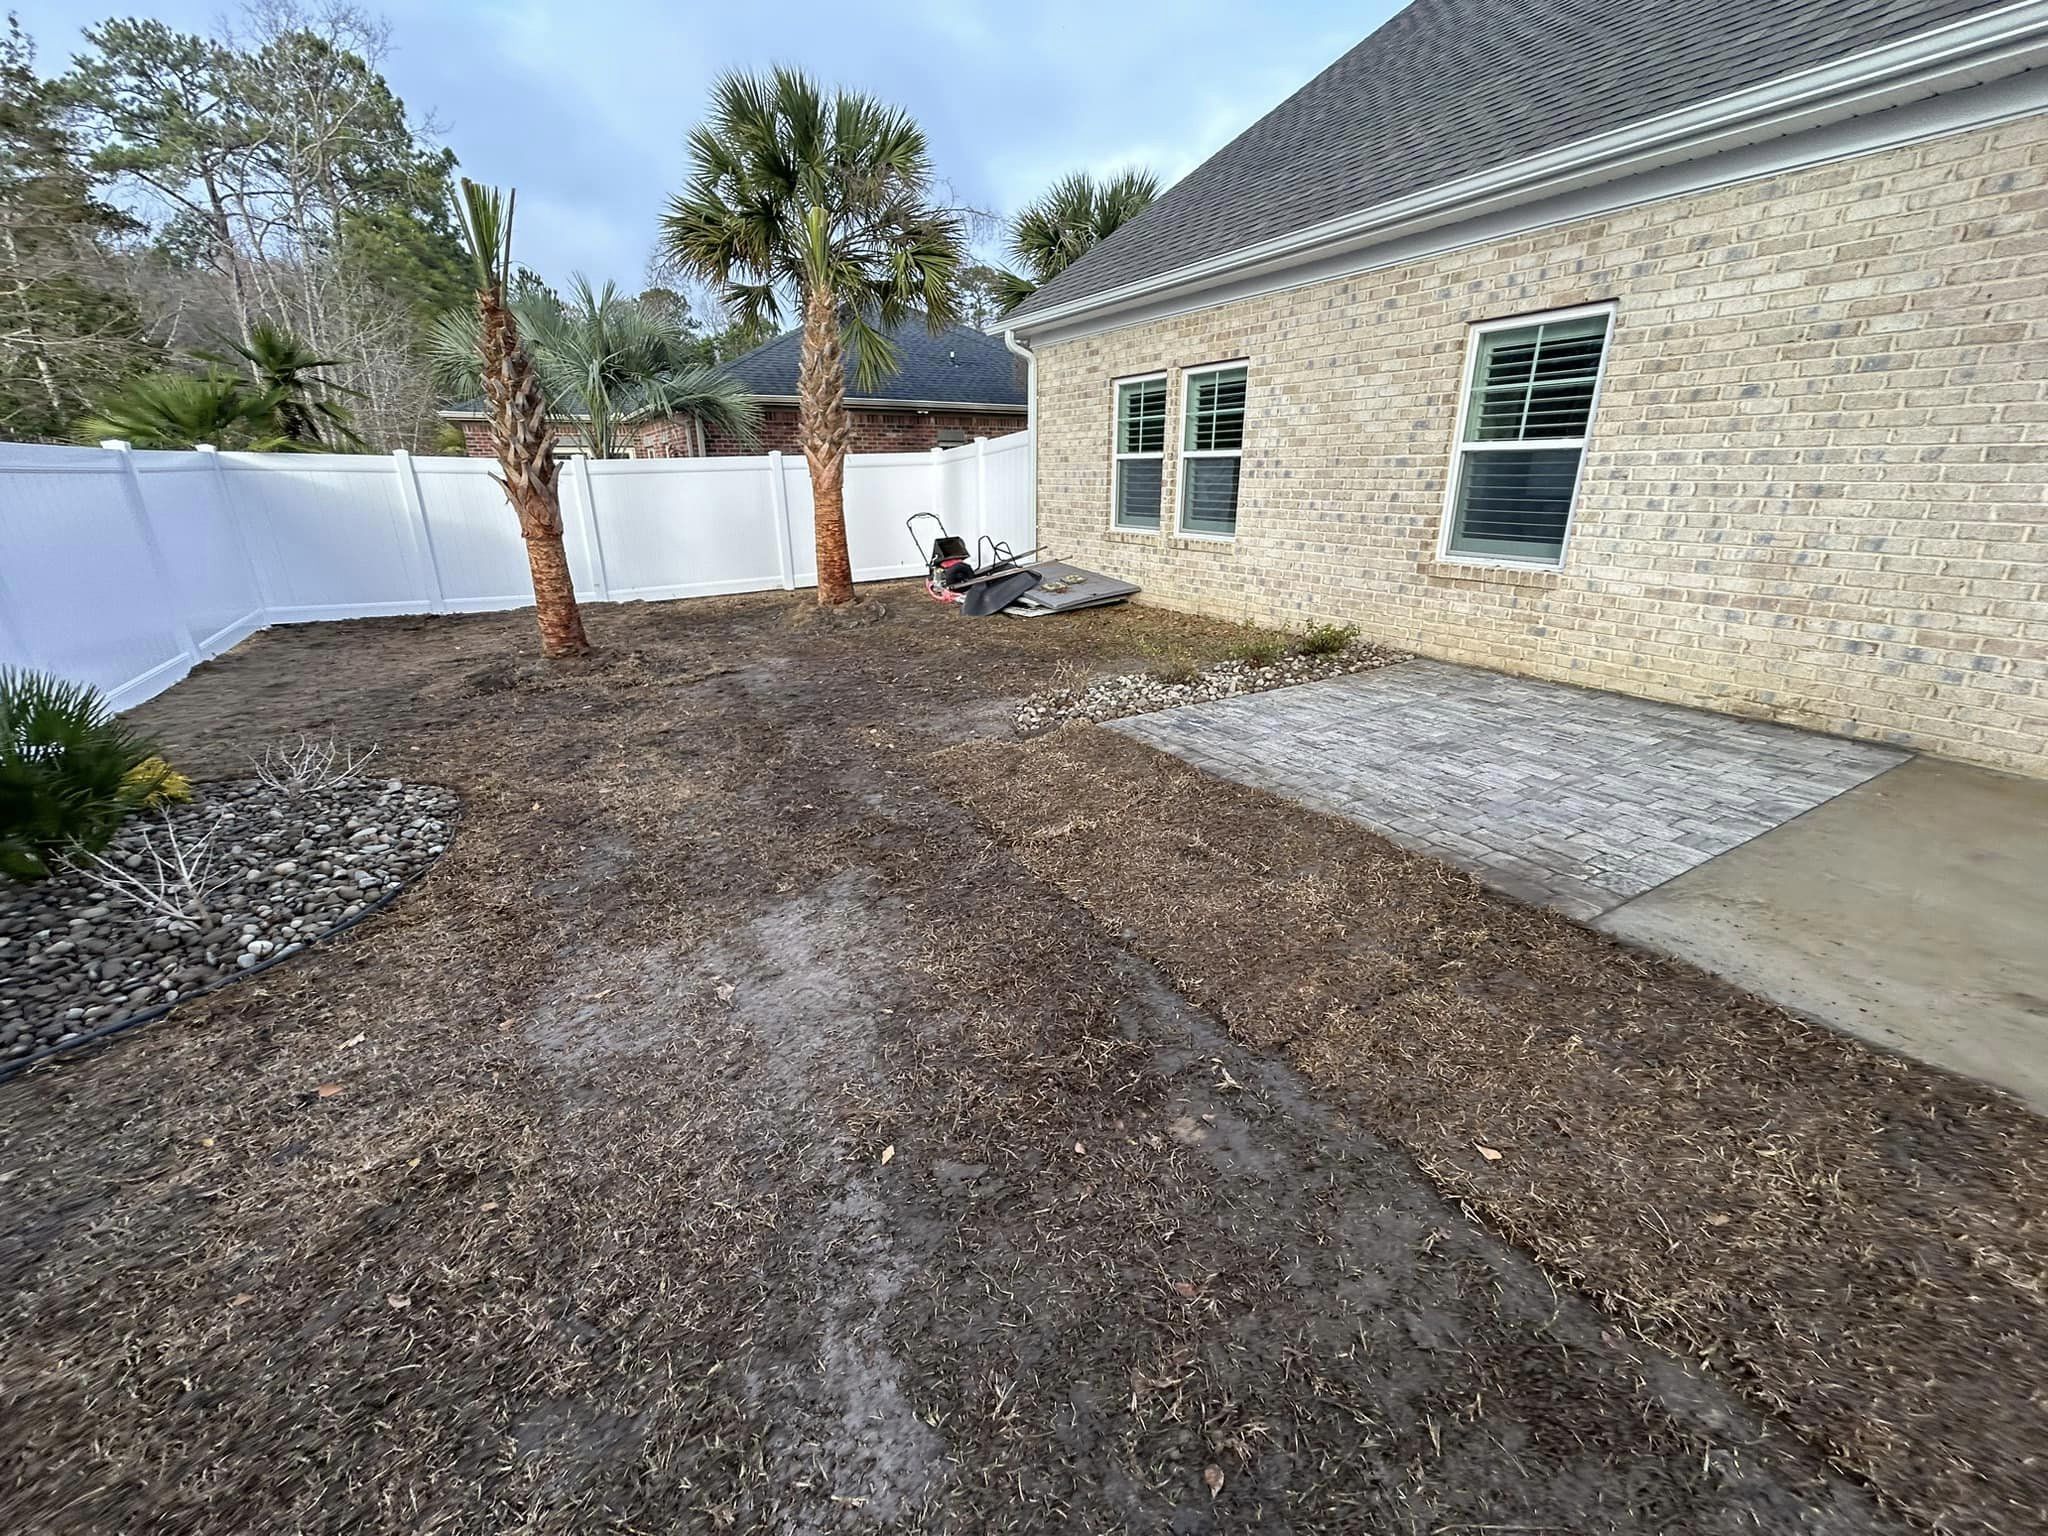 Installed 2 European palm tree and 2 Sabal palm trees in Longs,SC 29568